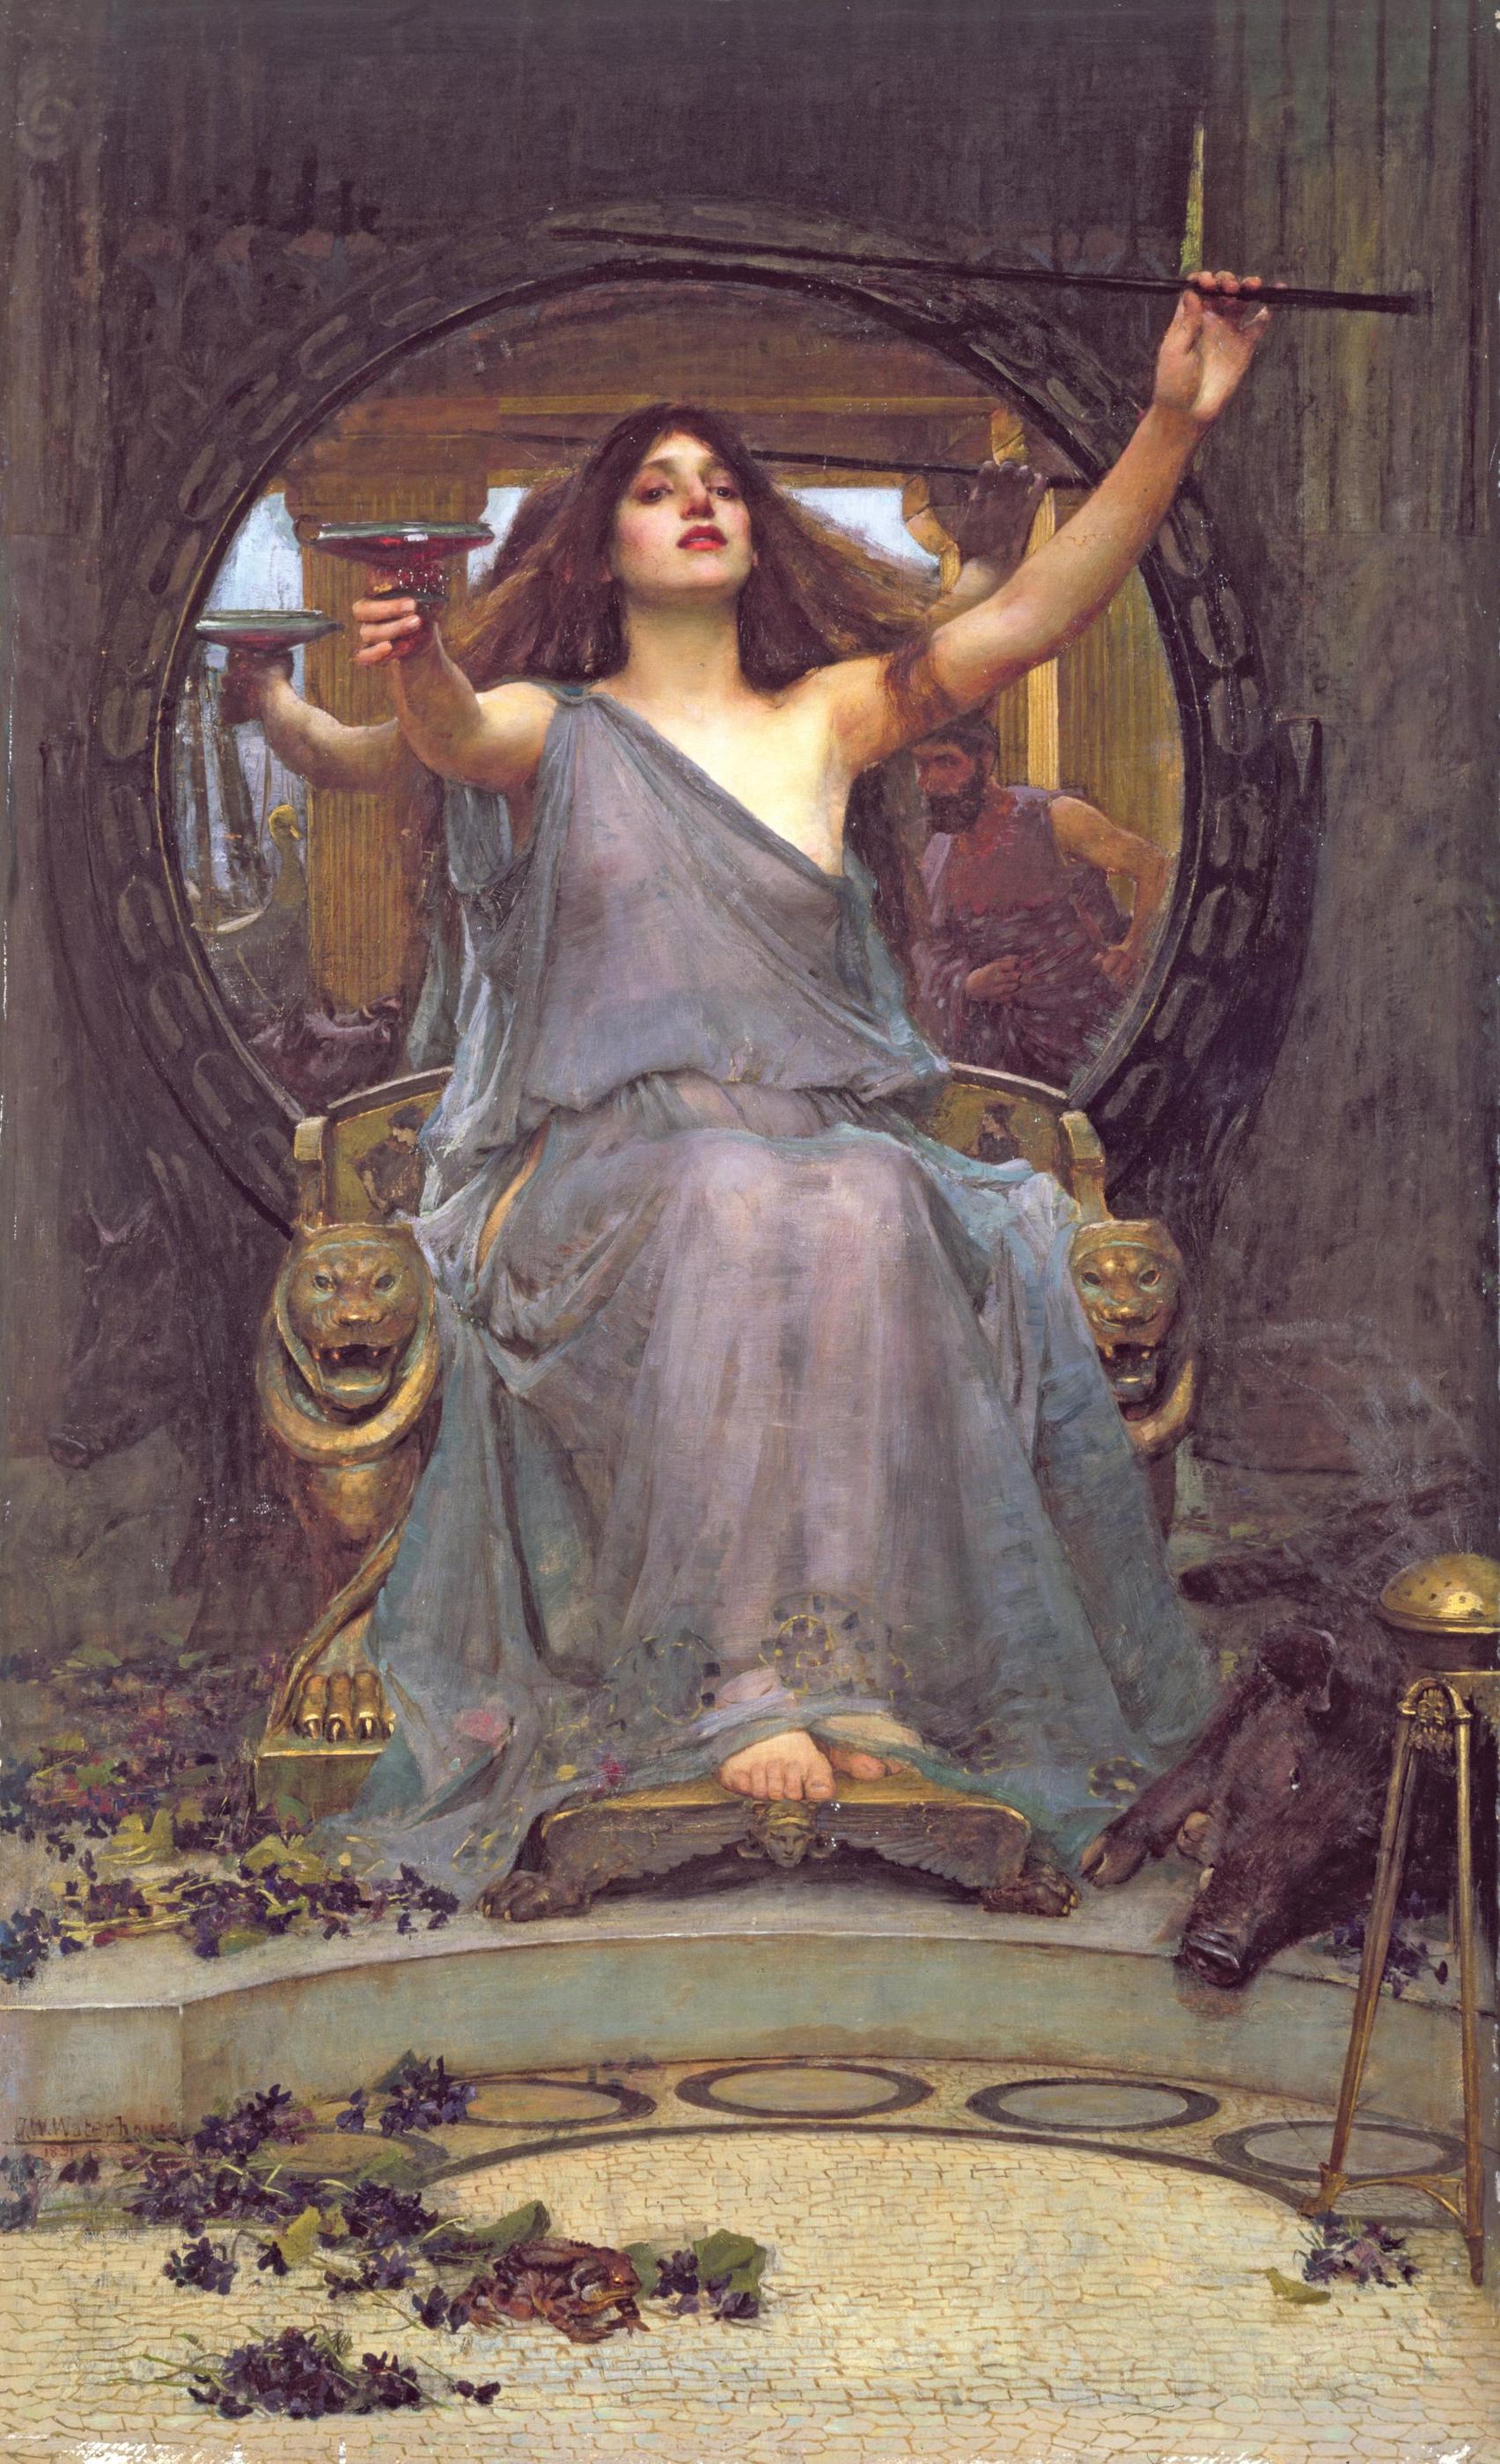 Circe Offering the Cup to Ulysses by John William Waterhouse - 1891 - 175 cm × 92 cm Gallery Oldham